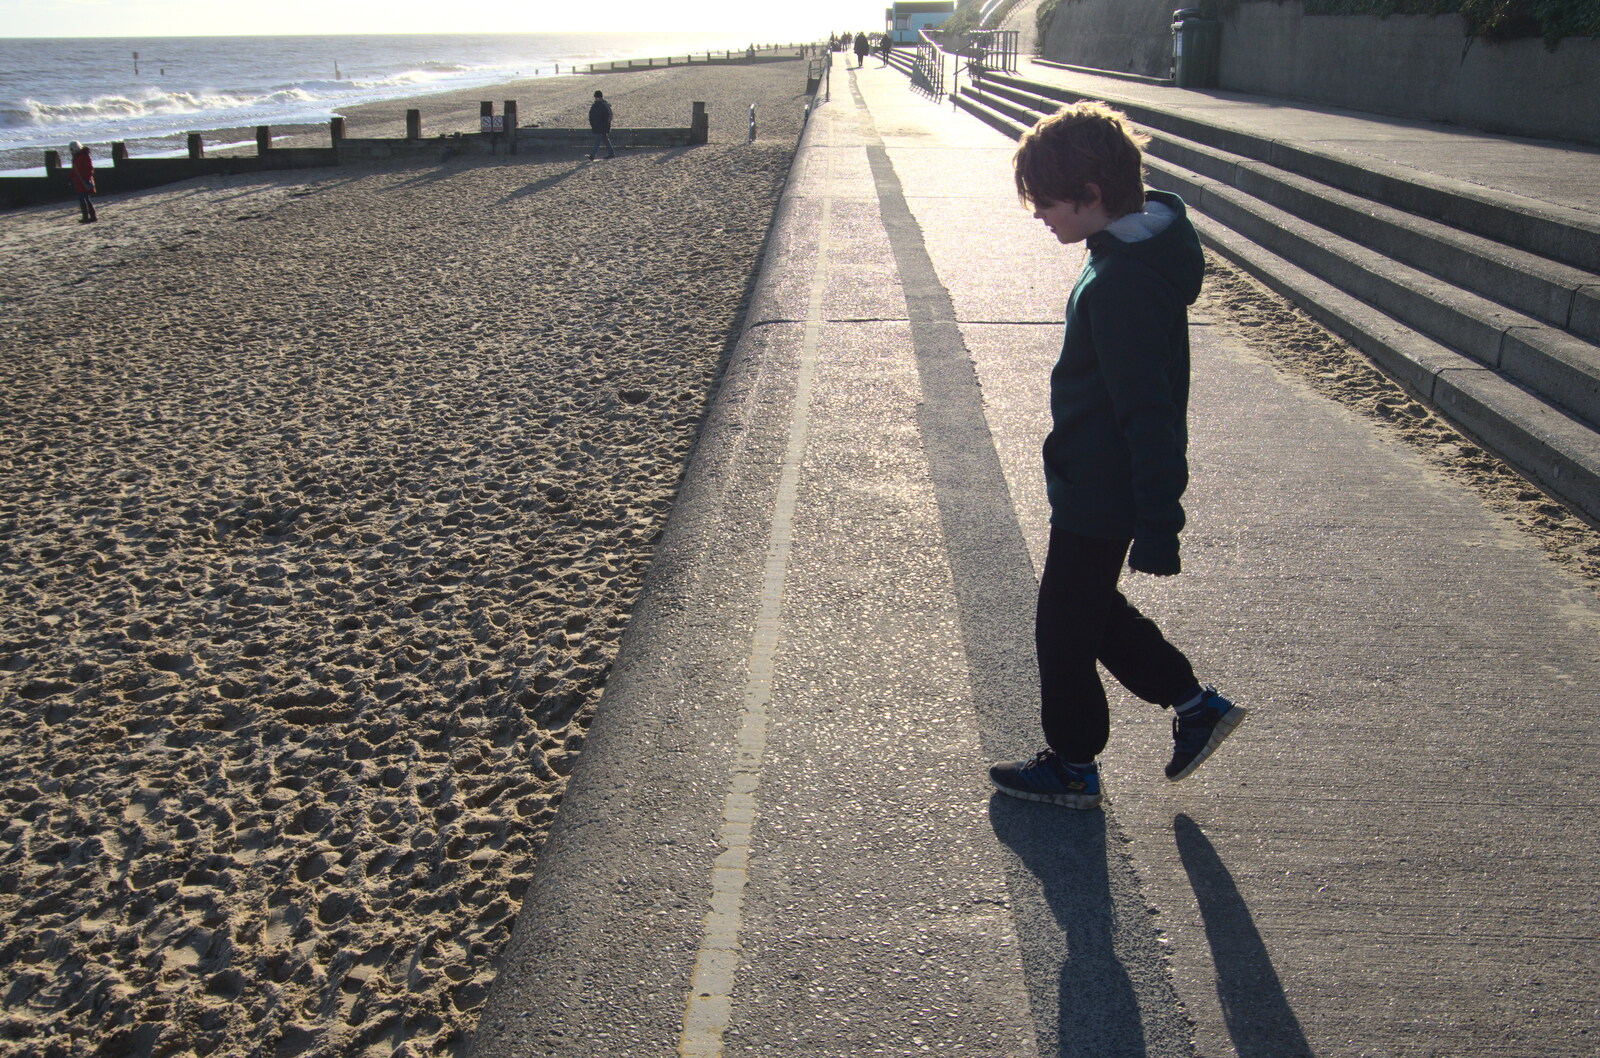 Fred considers the next jump from A Return to the Beach, Southwold, Suffolk - 20th December 2020